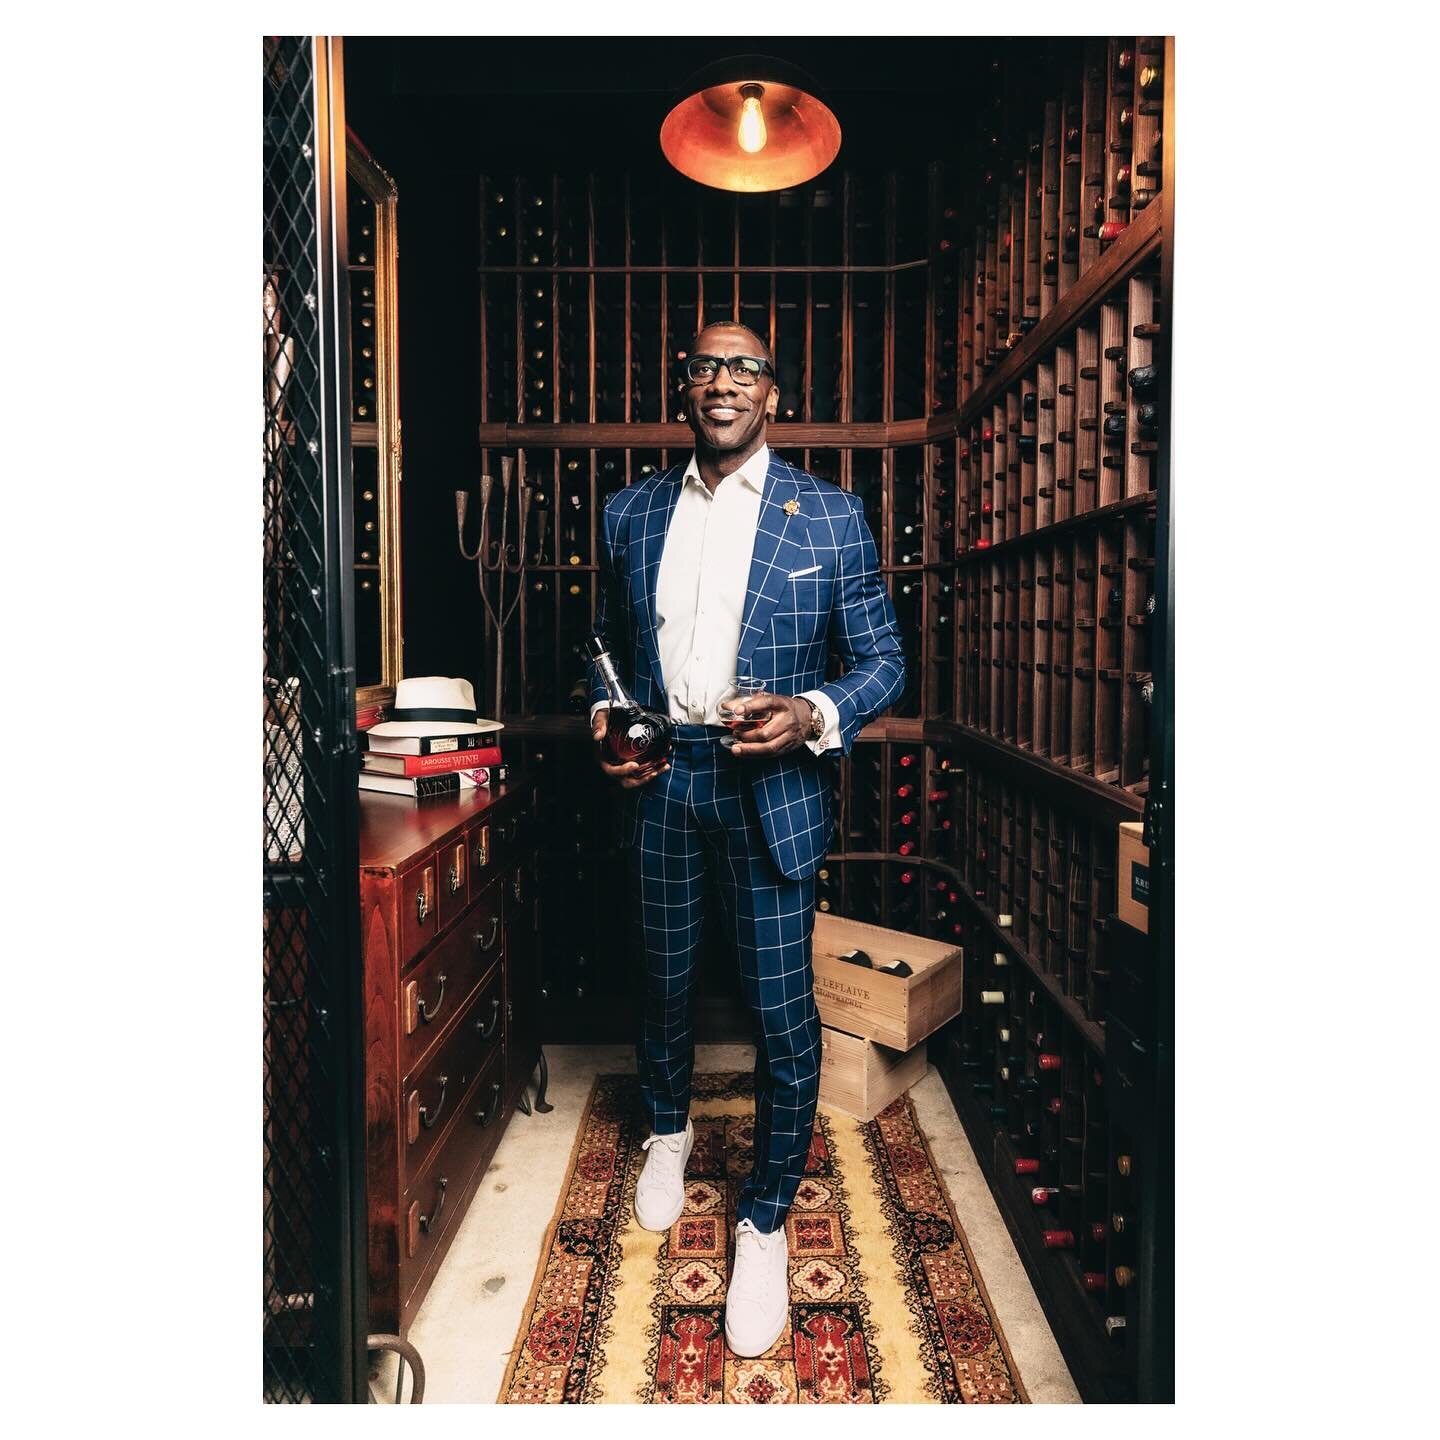 In honor of the the big game on Sunday, a few outtakes from my shoot with three time Super Bowl champ and Pro Football Hall of Famer, Shannon Sharpe